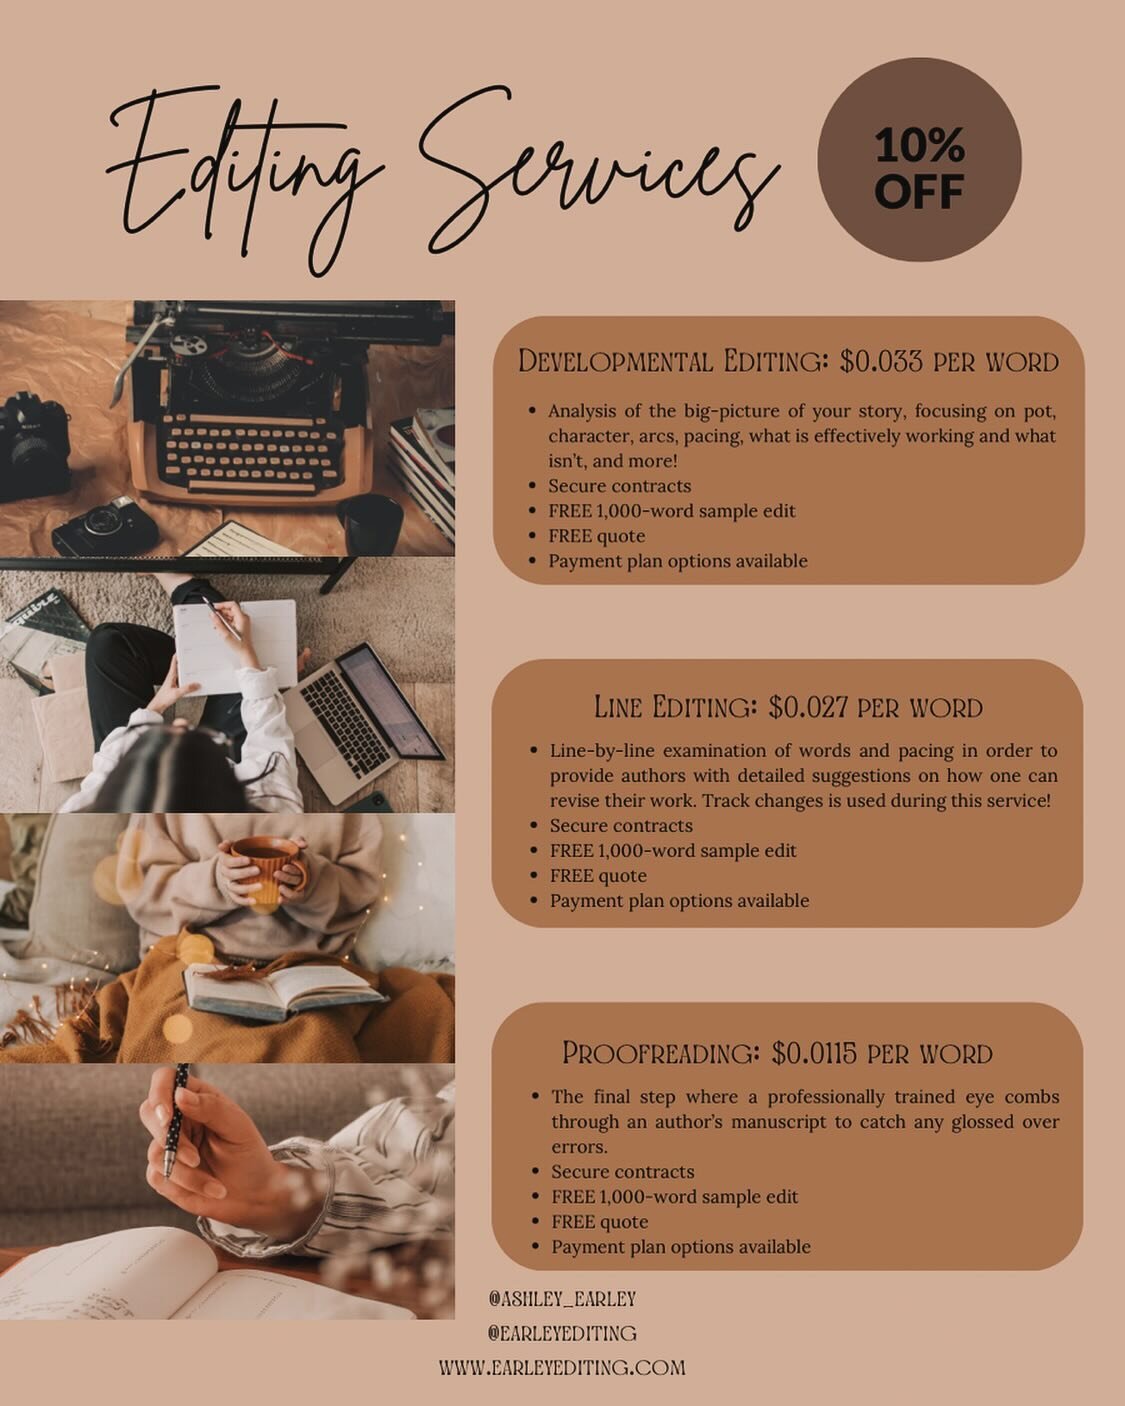 Hi writers!

I&rsquo;ve been a full-time editor since receiving my Bachelor of Arts degree in English with an emphasis in Creative Writing. That was when I founded @earleyediting, and that was nearly 3 years ago now!

I&rsquo;ve helped several client